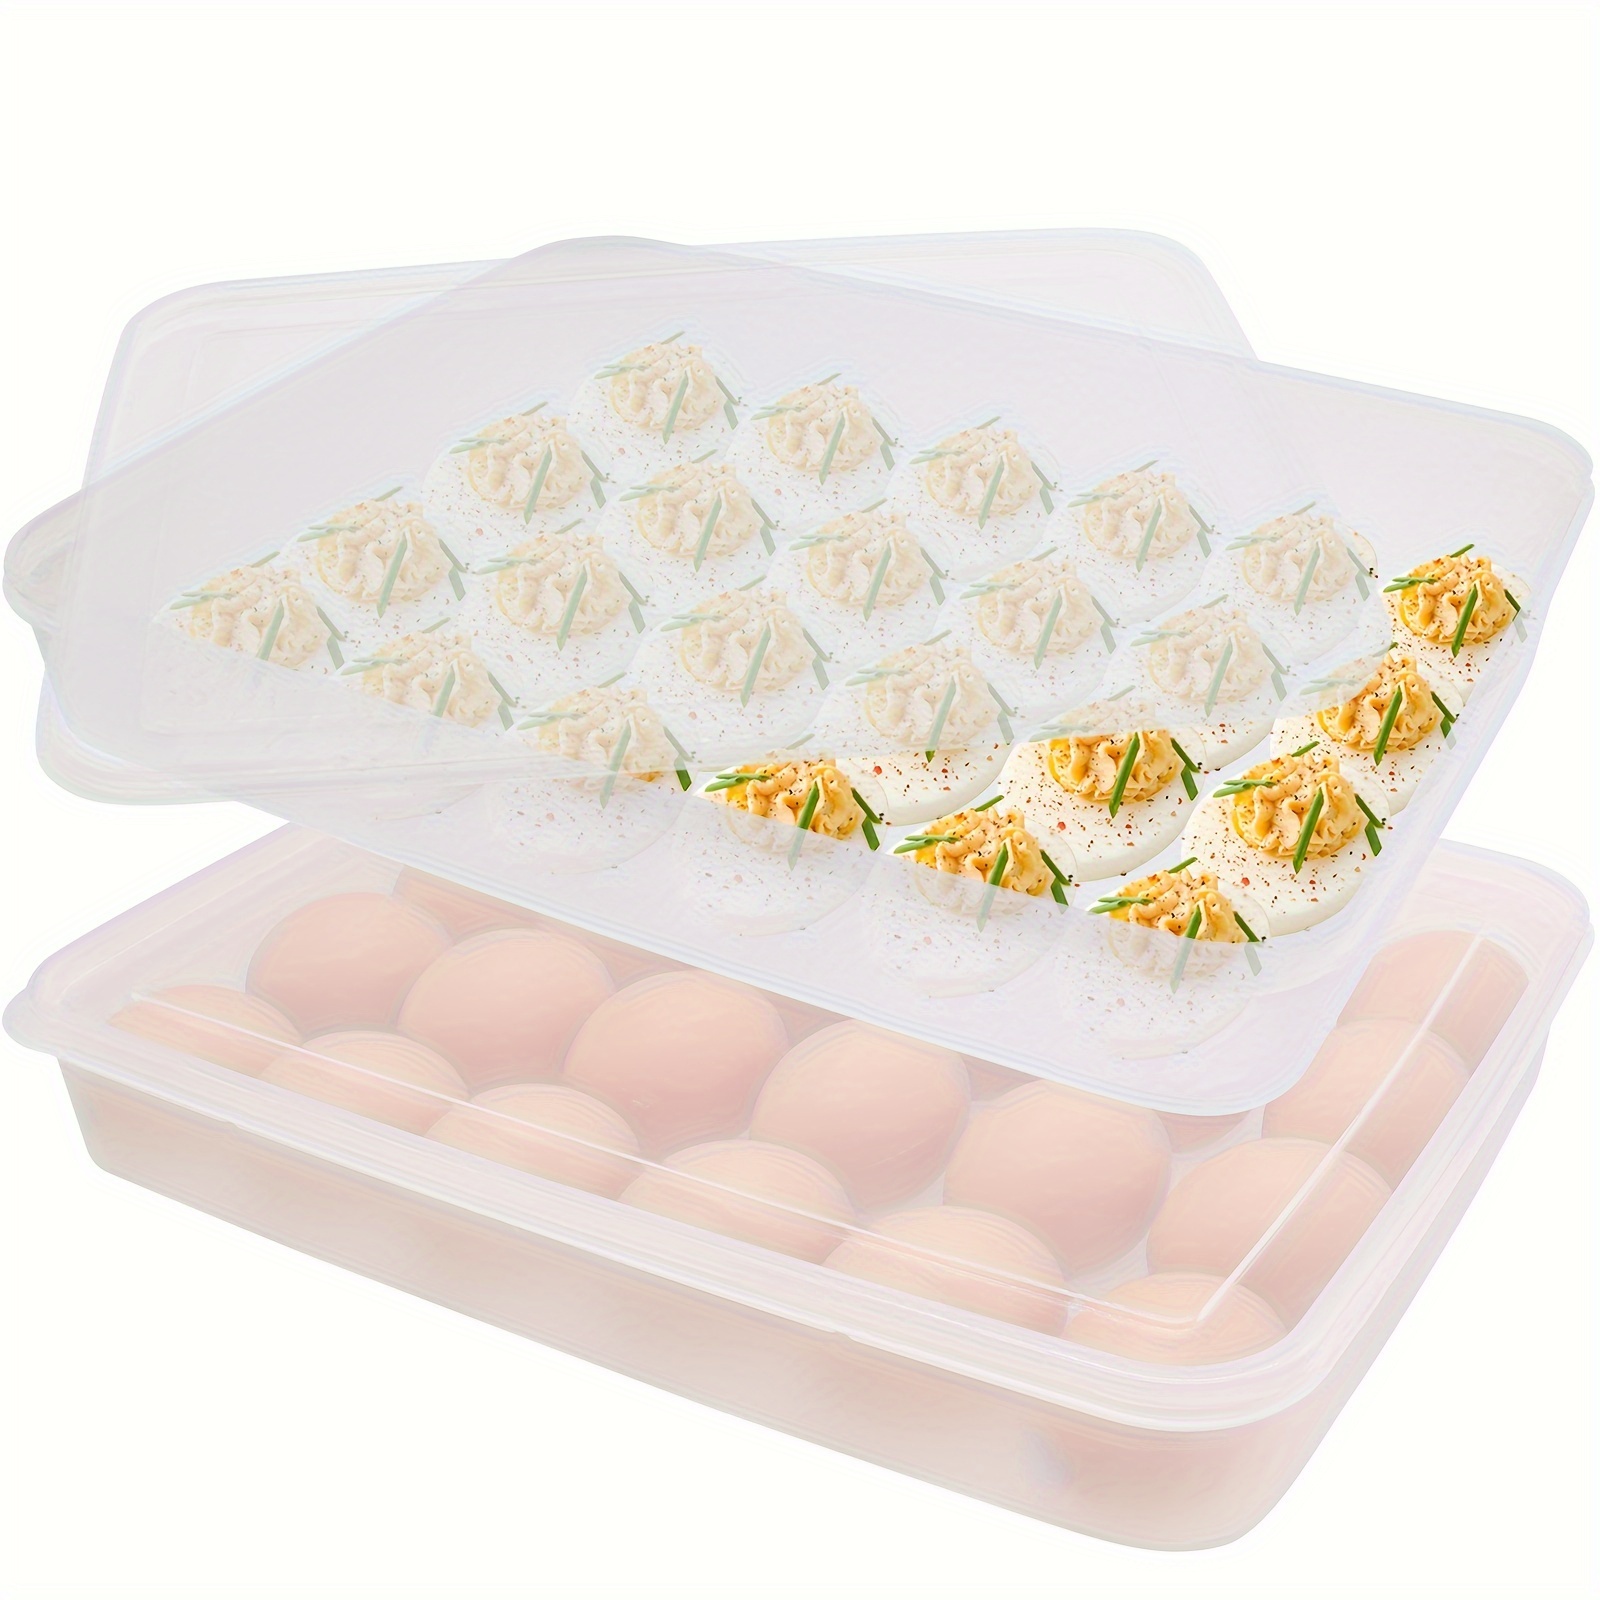 

2pcs Egg Trays With Lids, Clear Egg Tray Storage Containers, Stackable Plastic Refrigerator Egg Dish For Mustard Eggs To Protect And Keep Fresh (48 Eggs)